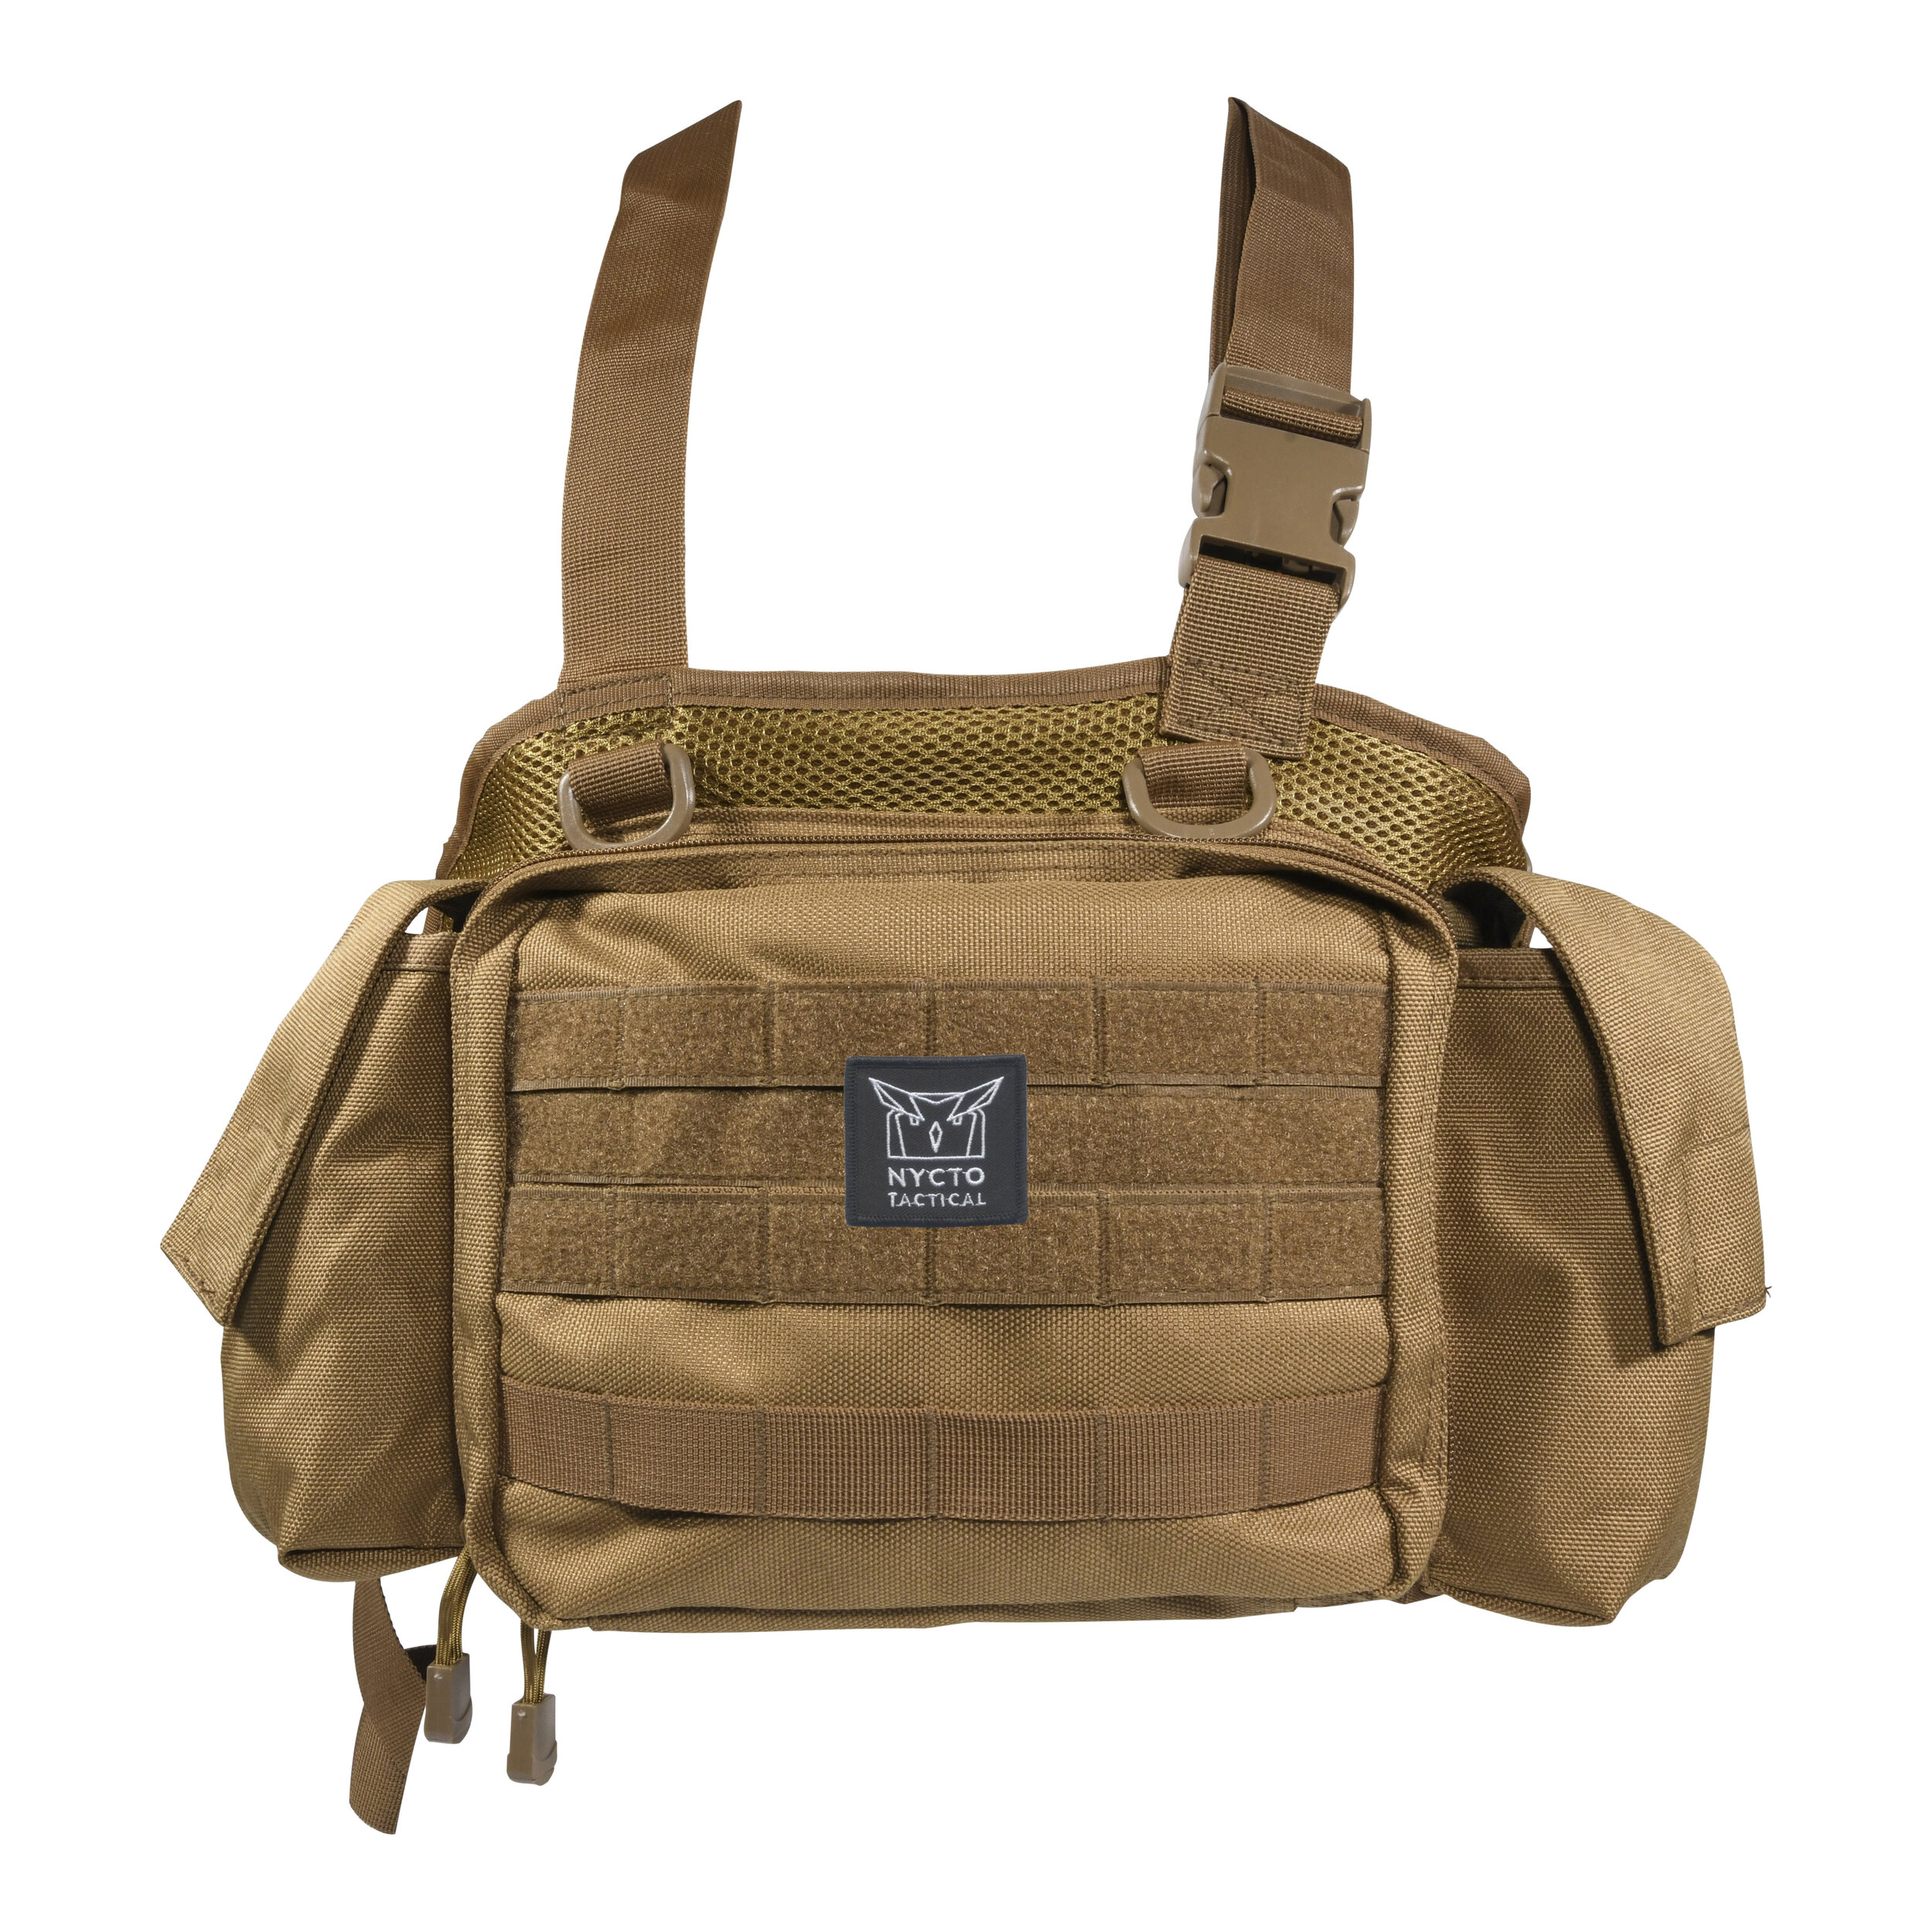 NYCTO Tactical Chest Rig — Creek Stewart